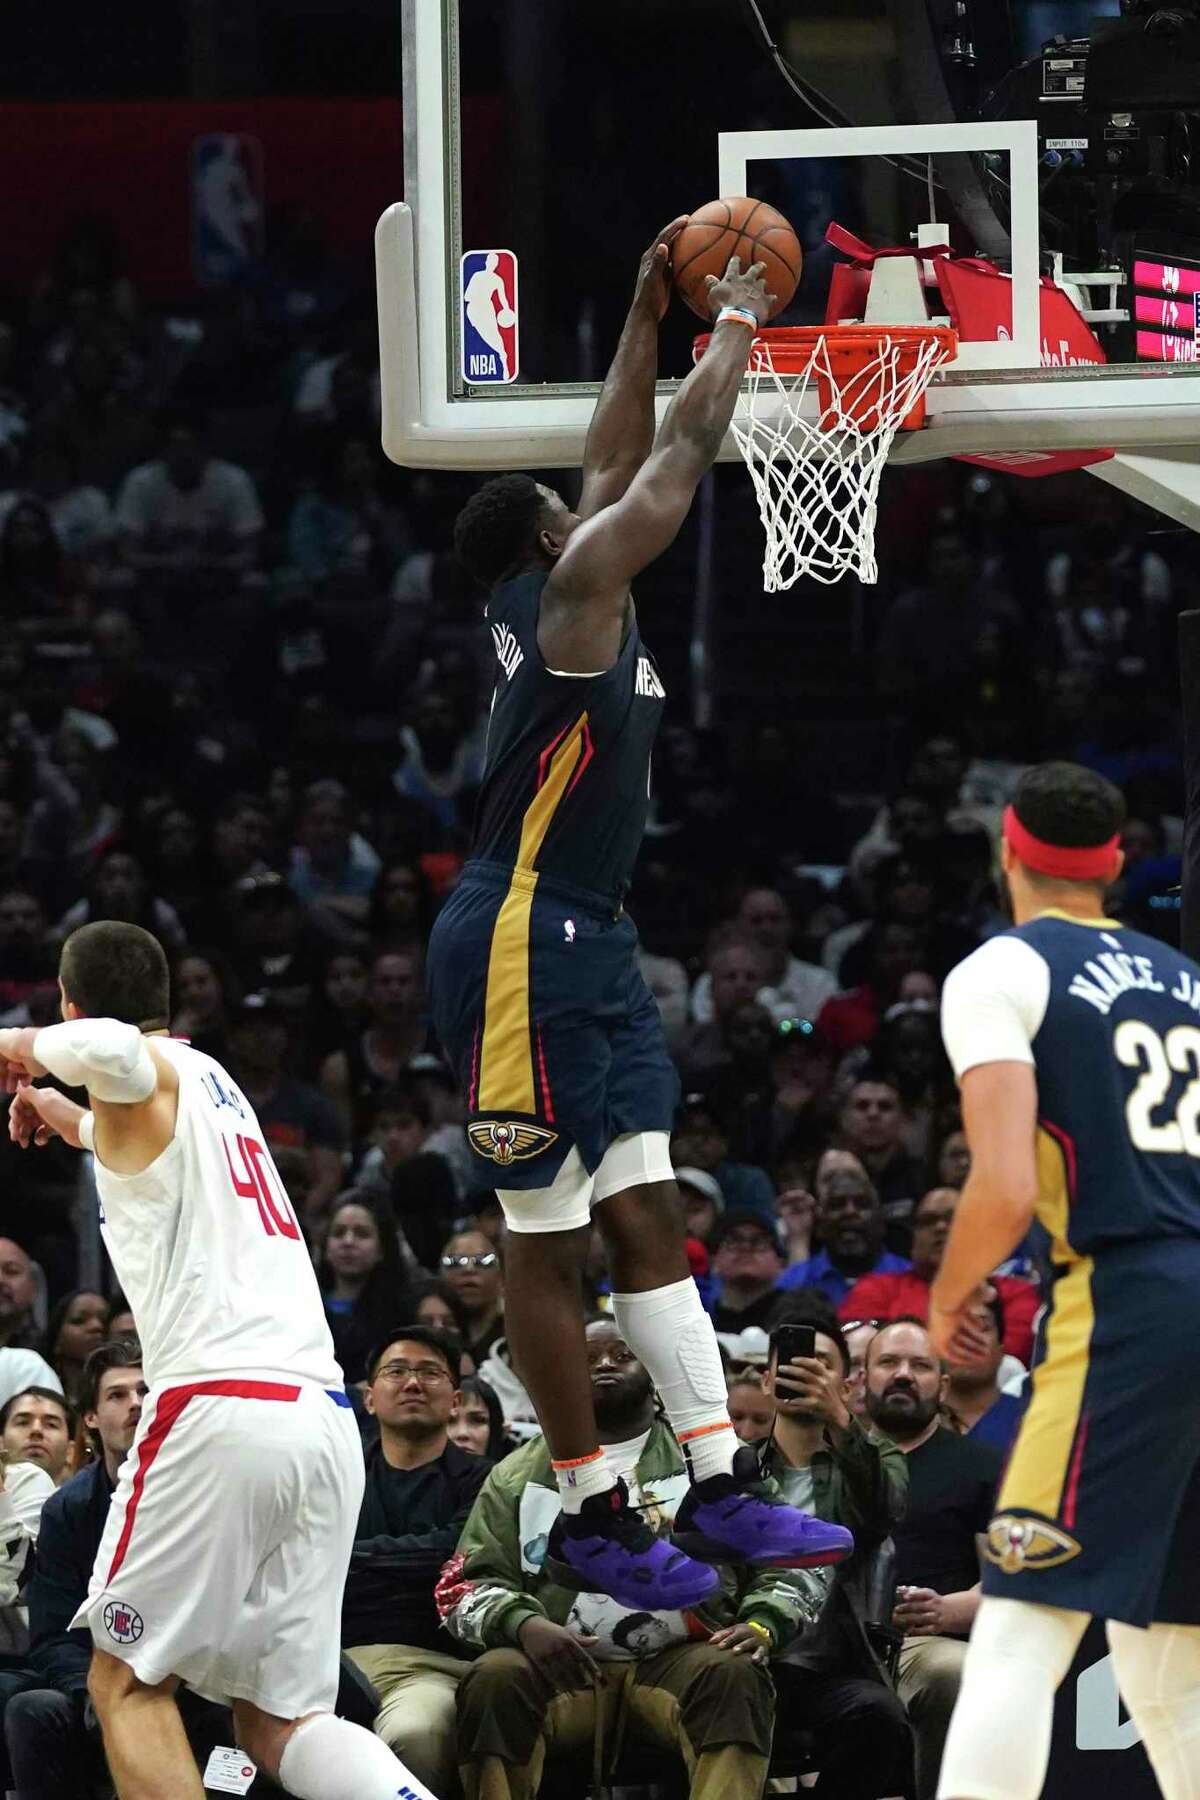 Pelicans top Celtics thanks to 21 points from Zion Williamson